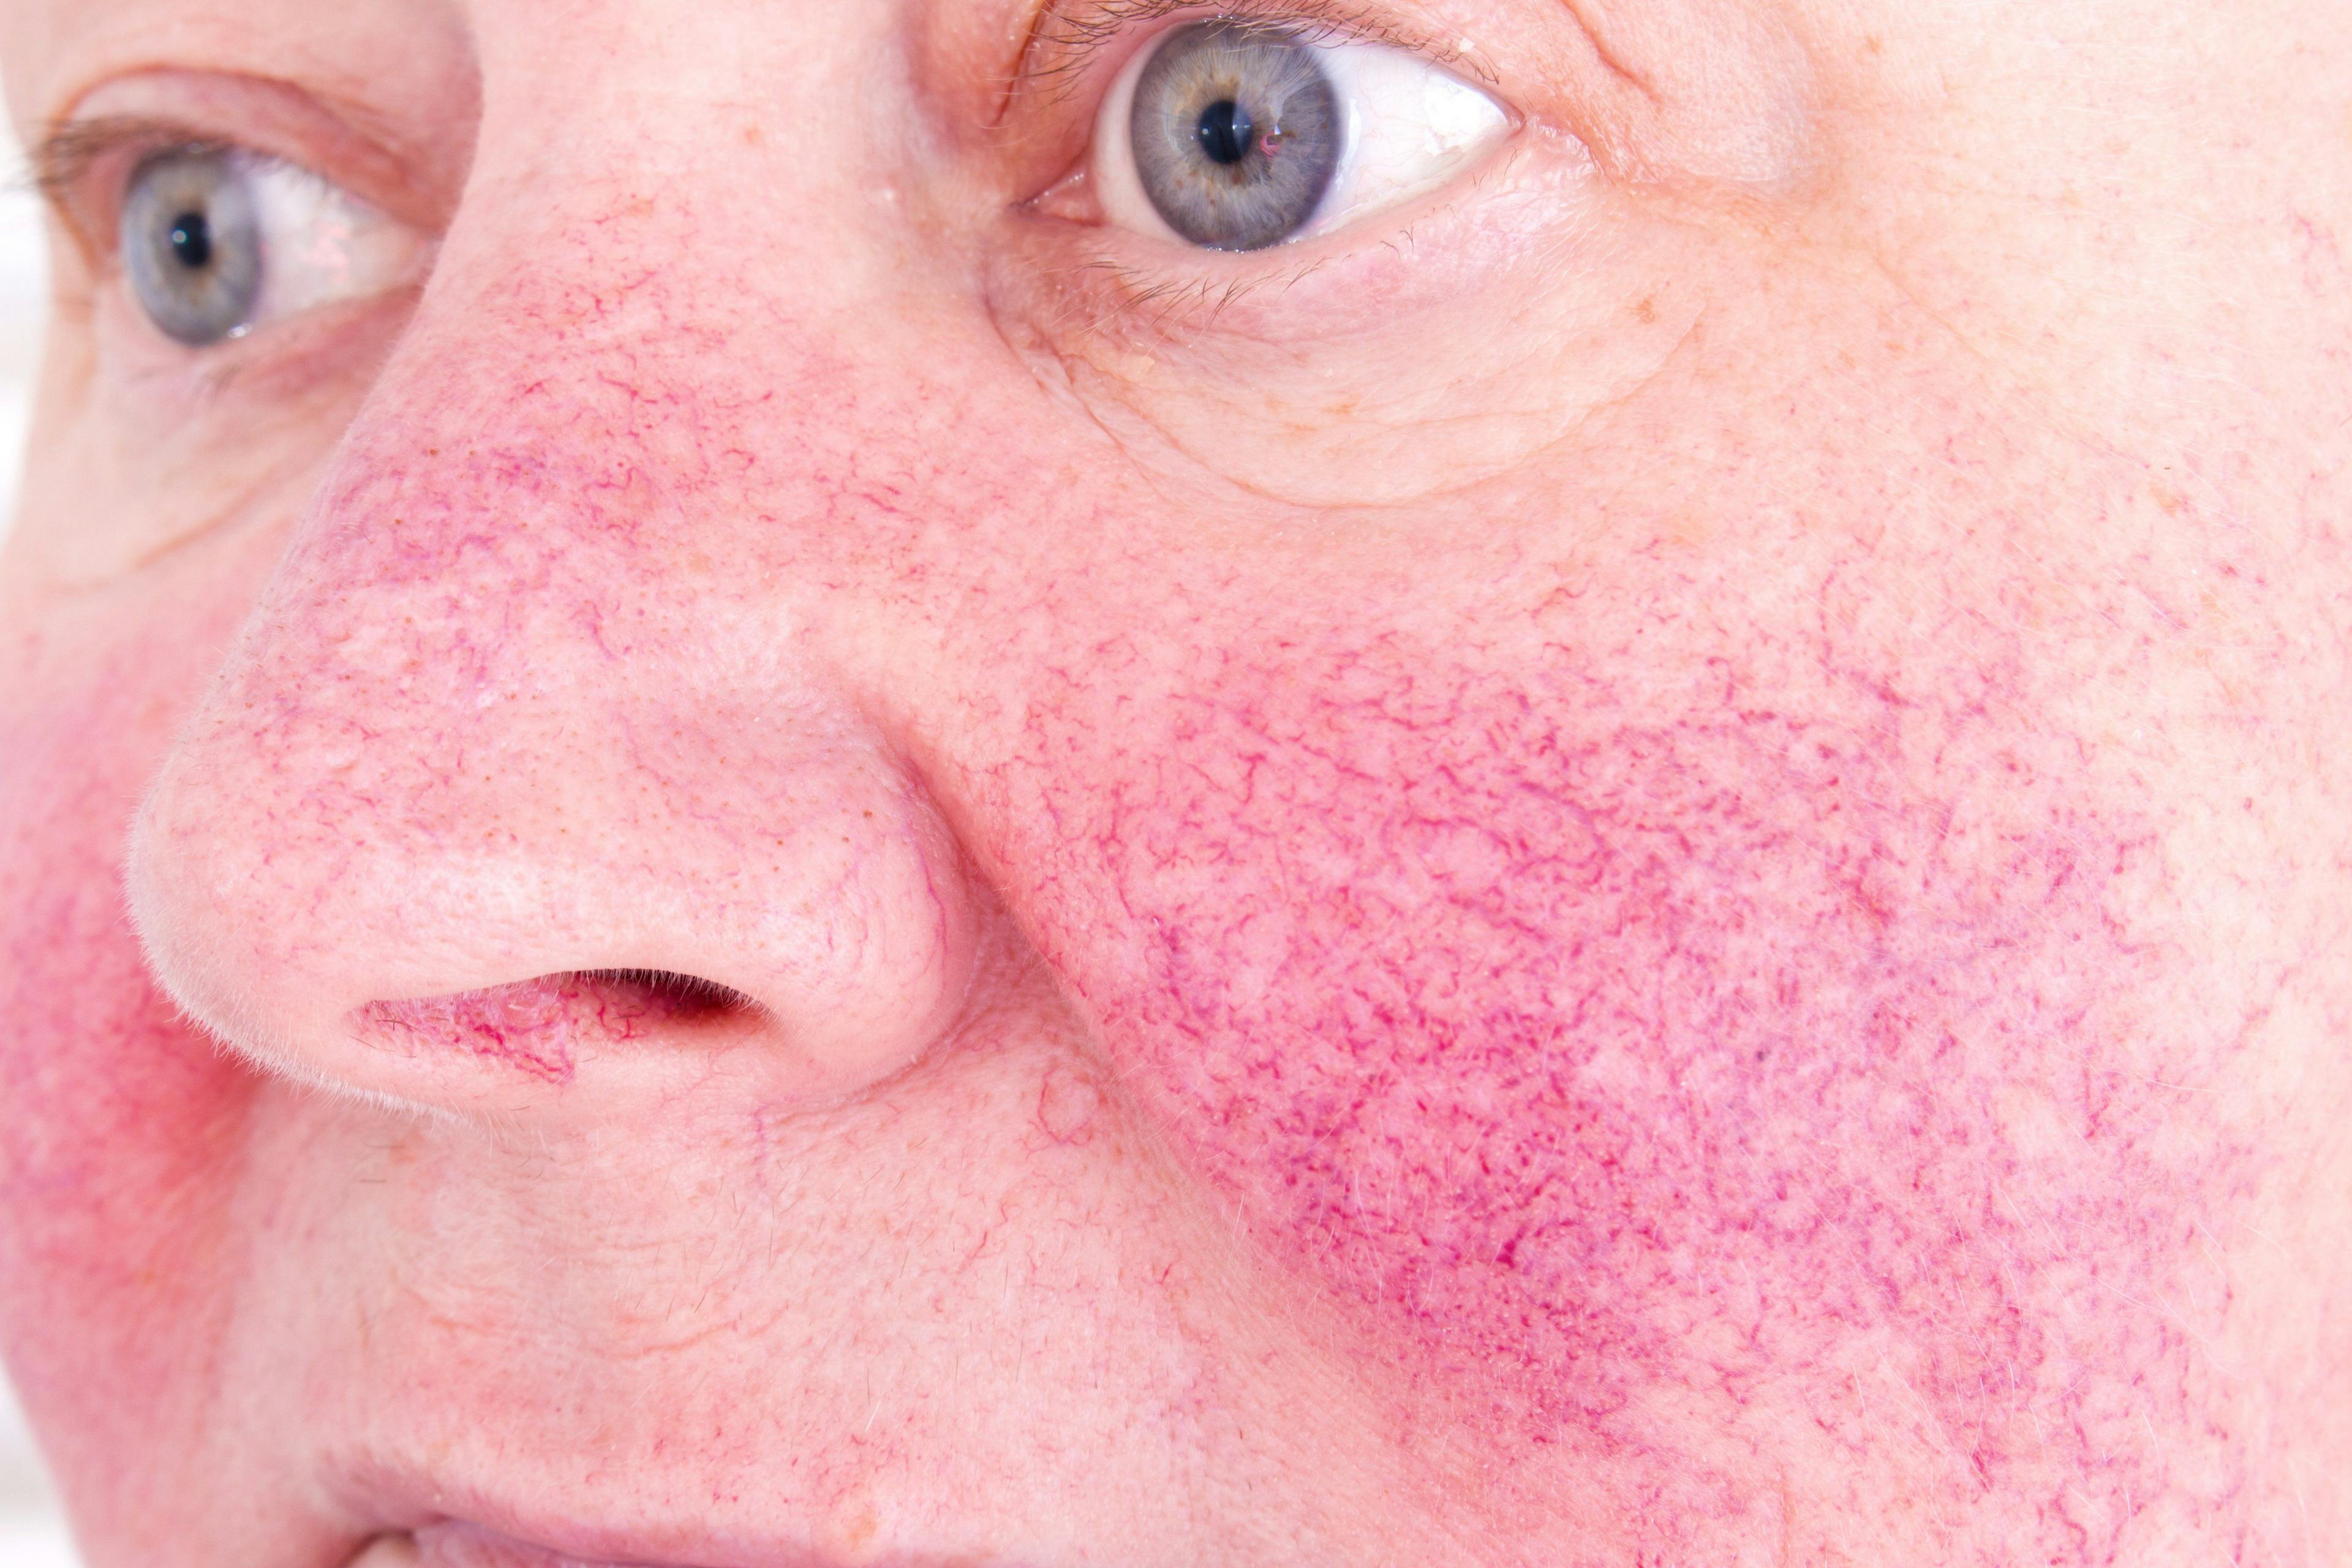 FDA approves first topical minocycline for rosacea